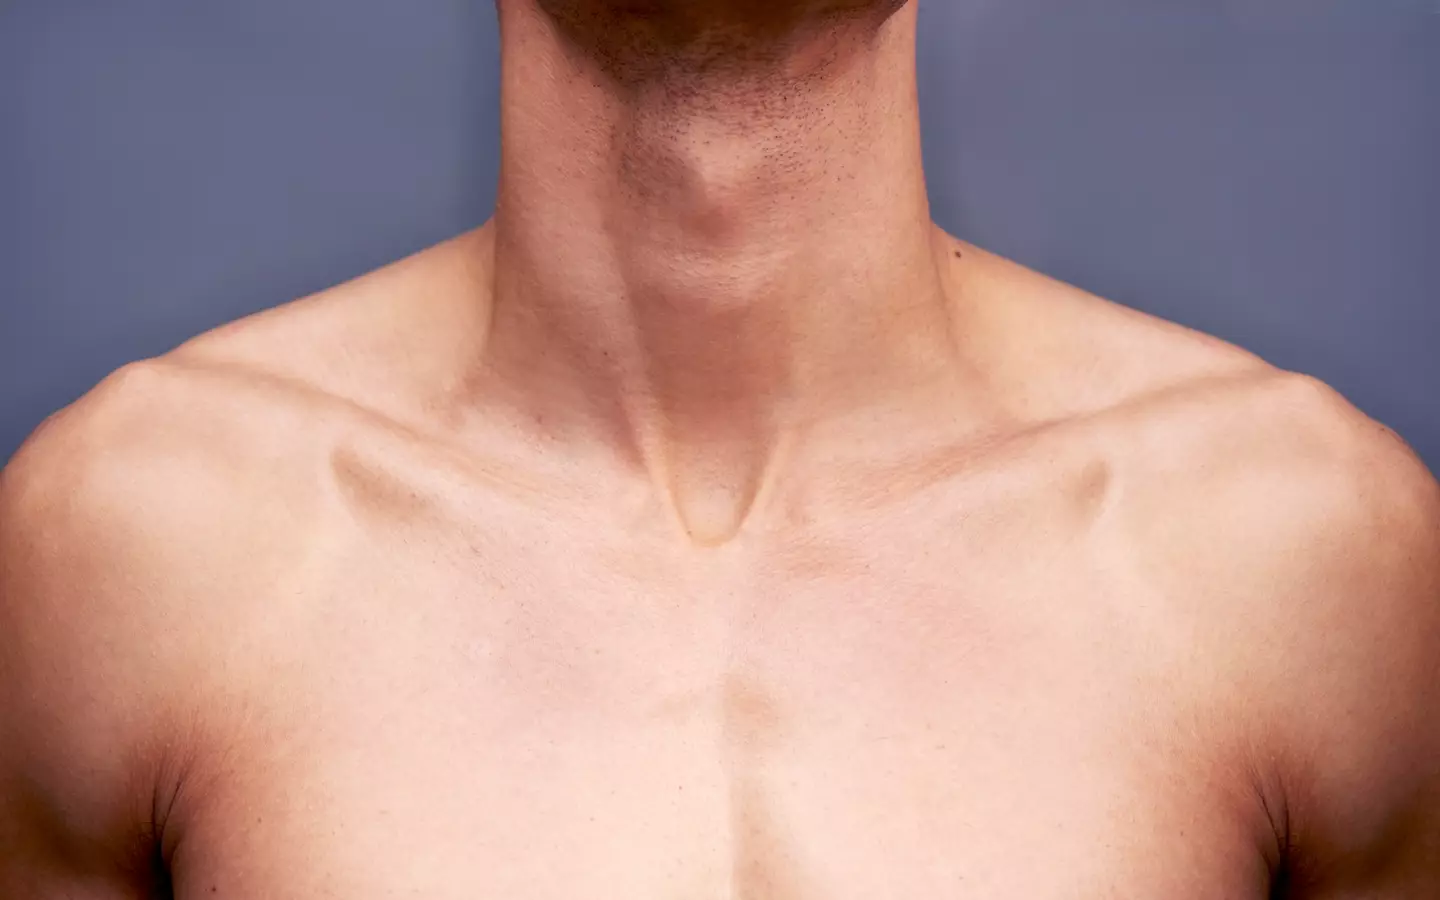 This is a neck, it connects your head to the rest of you, please look after it as you only have the one.